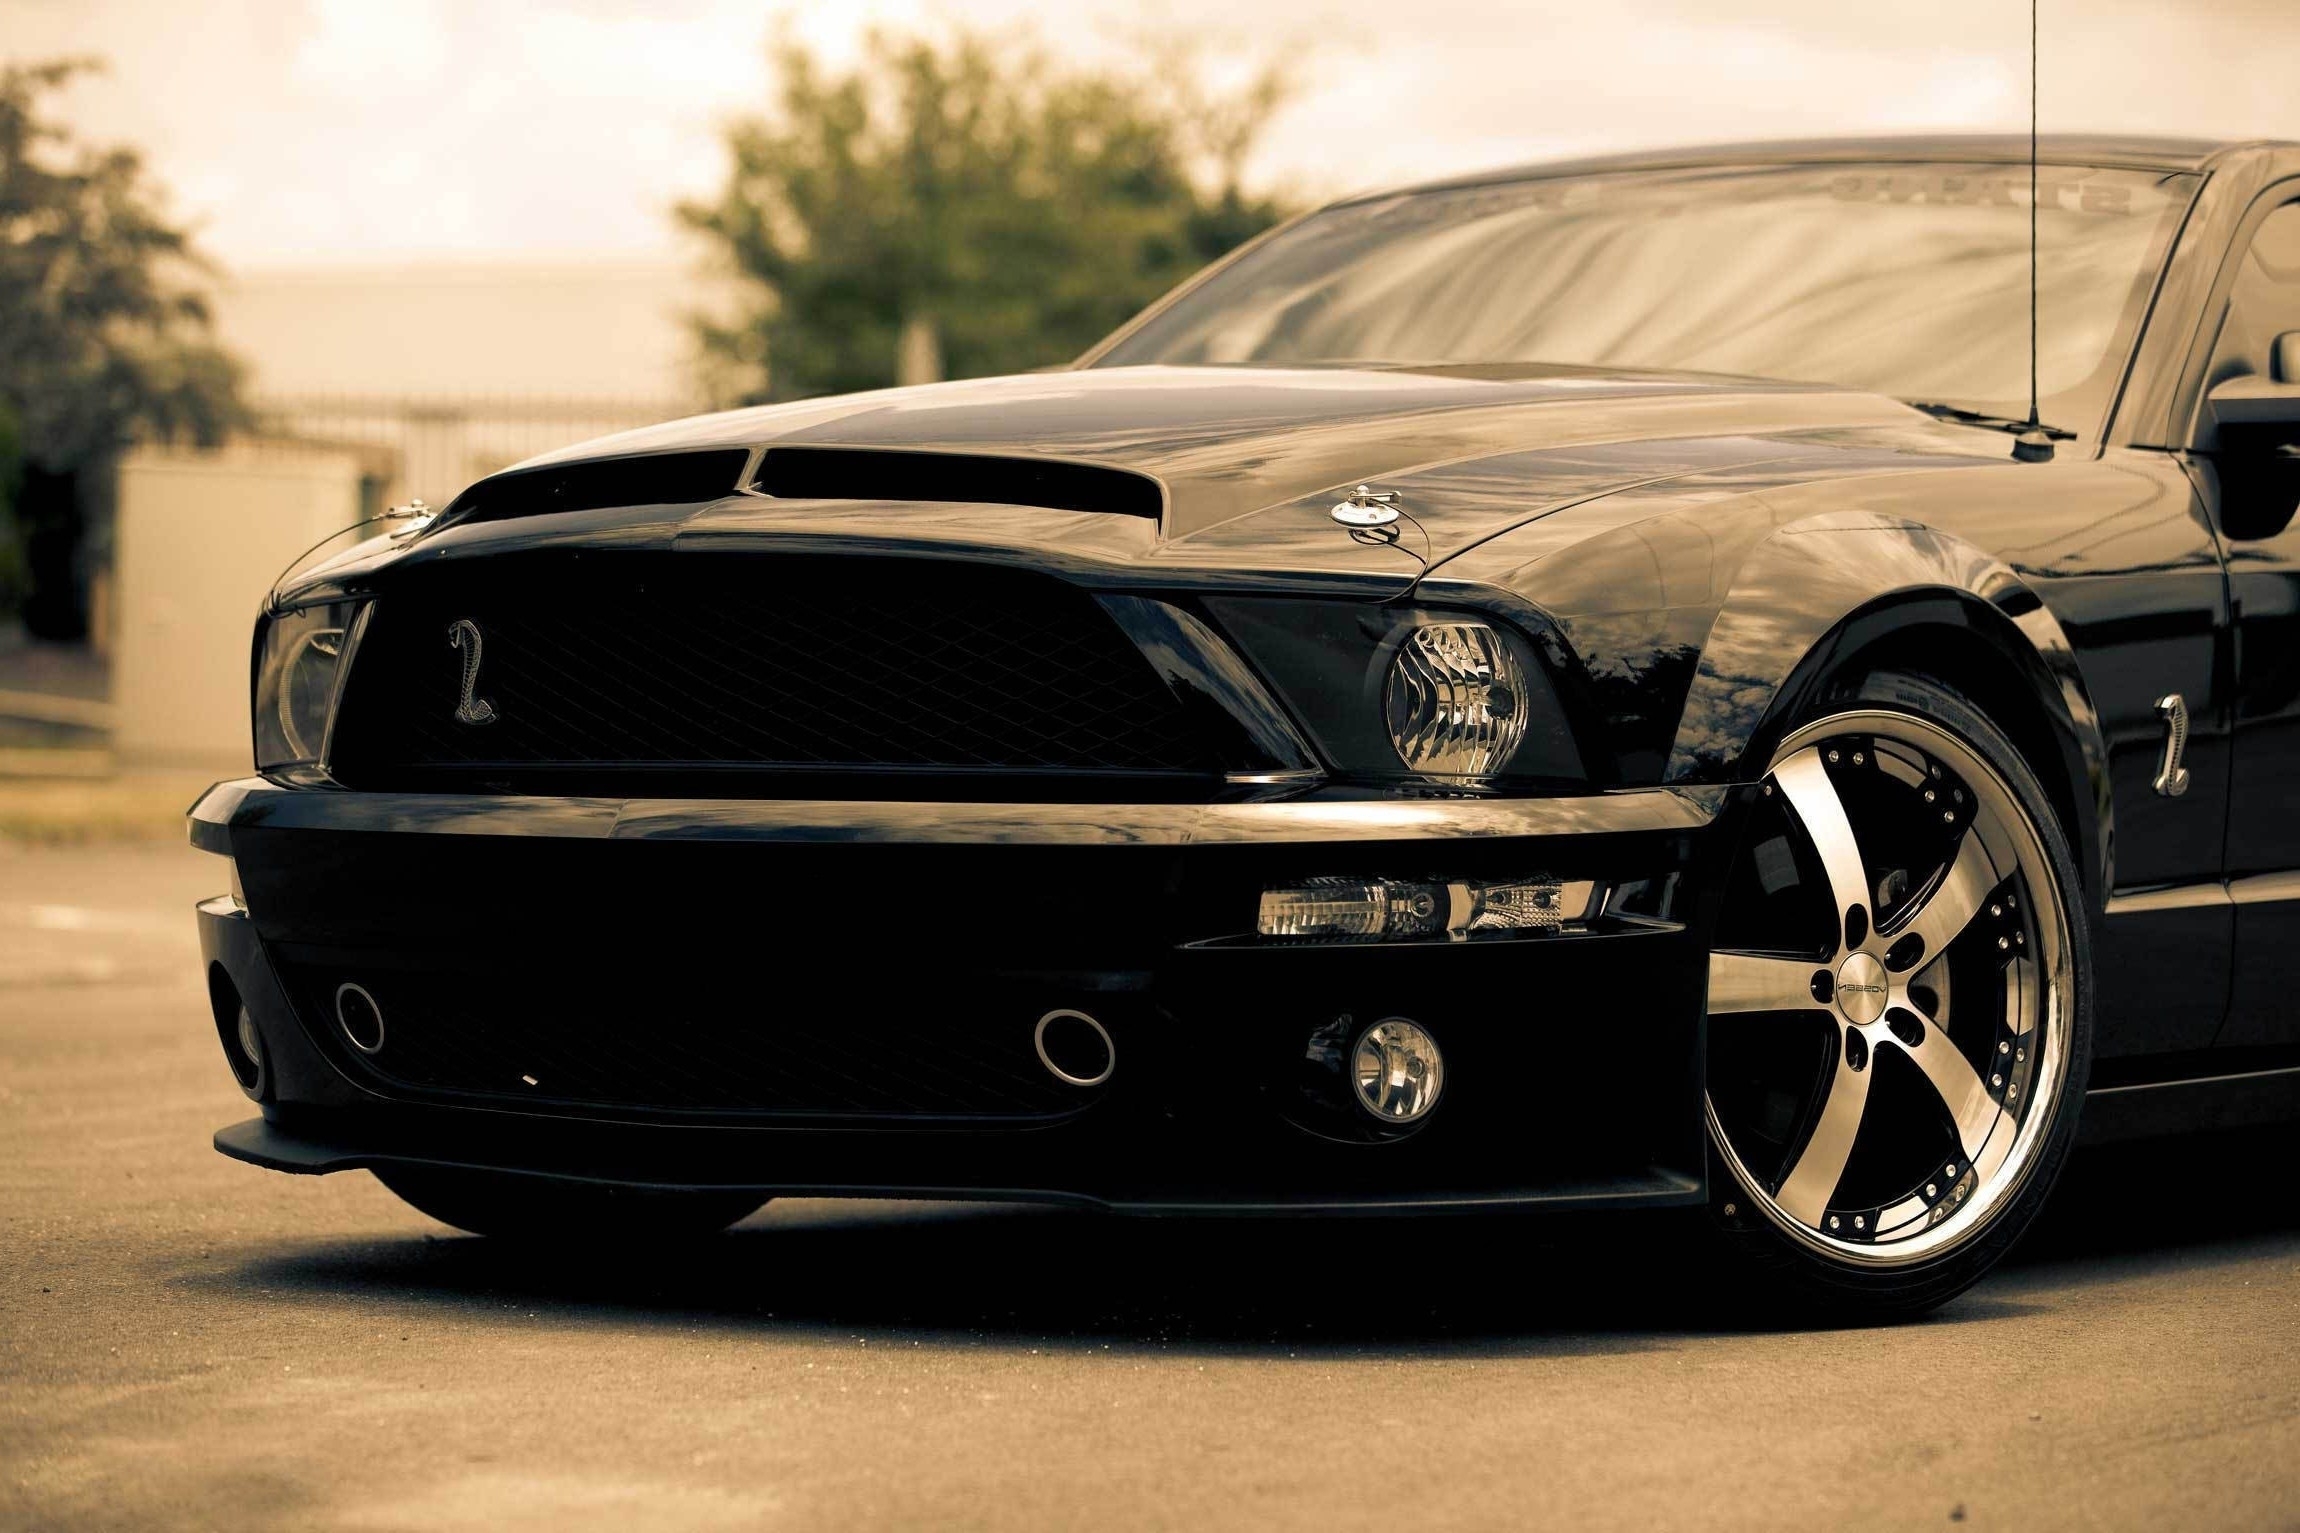  cars vehicles ford mustang knight rider 2300x1533 wallpaper download